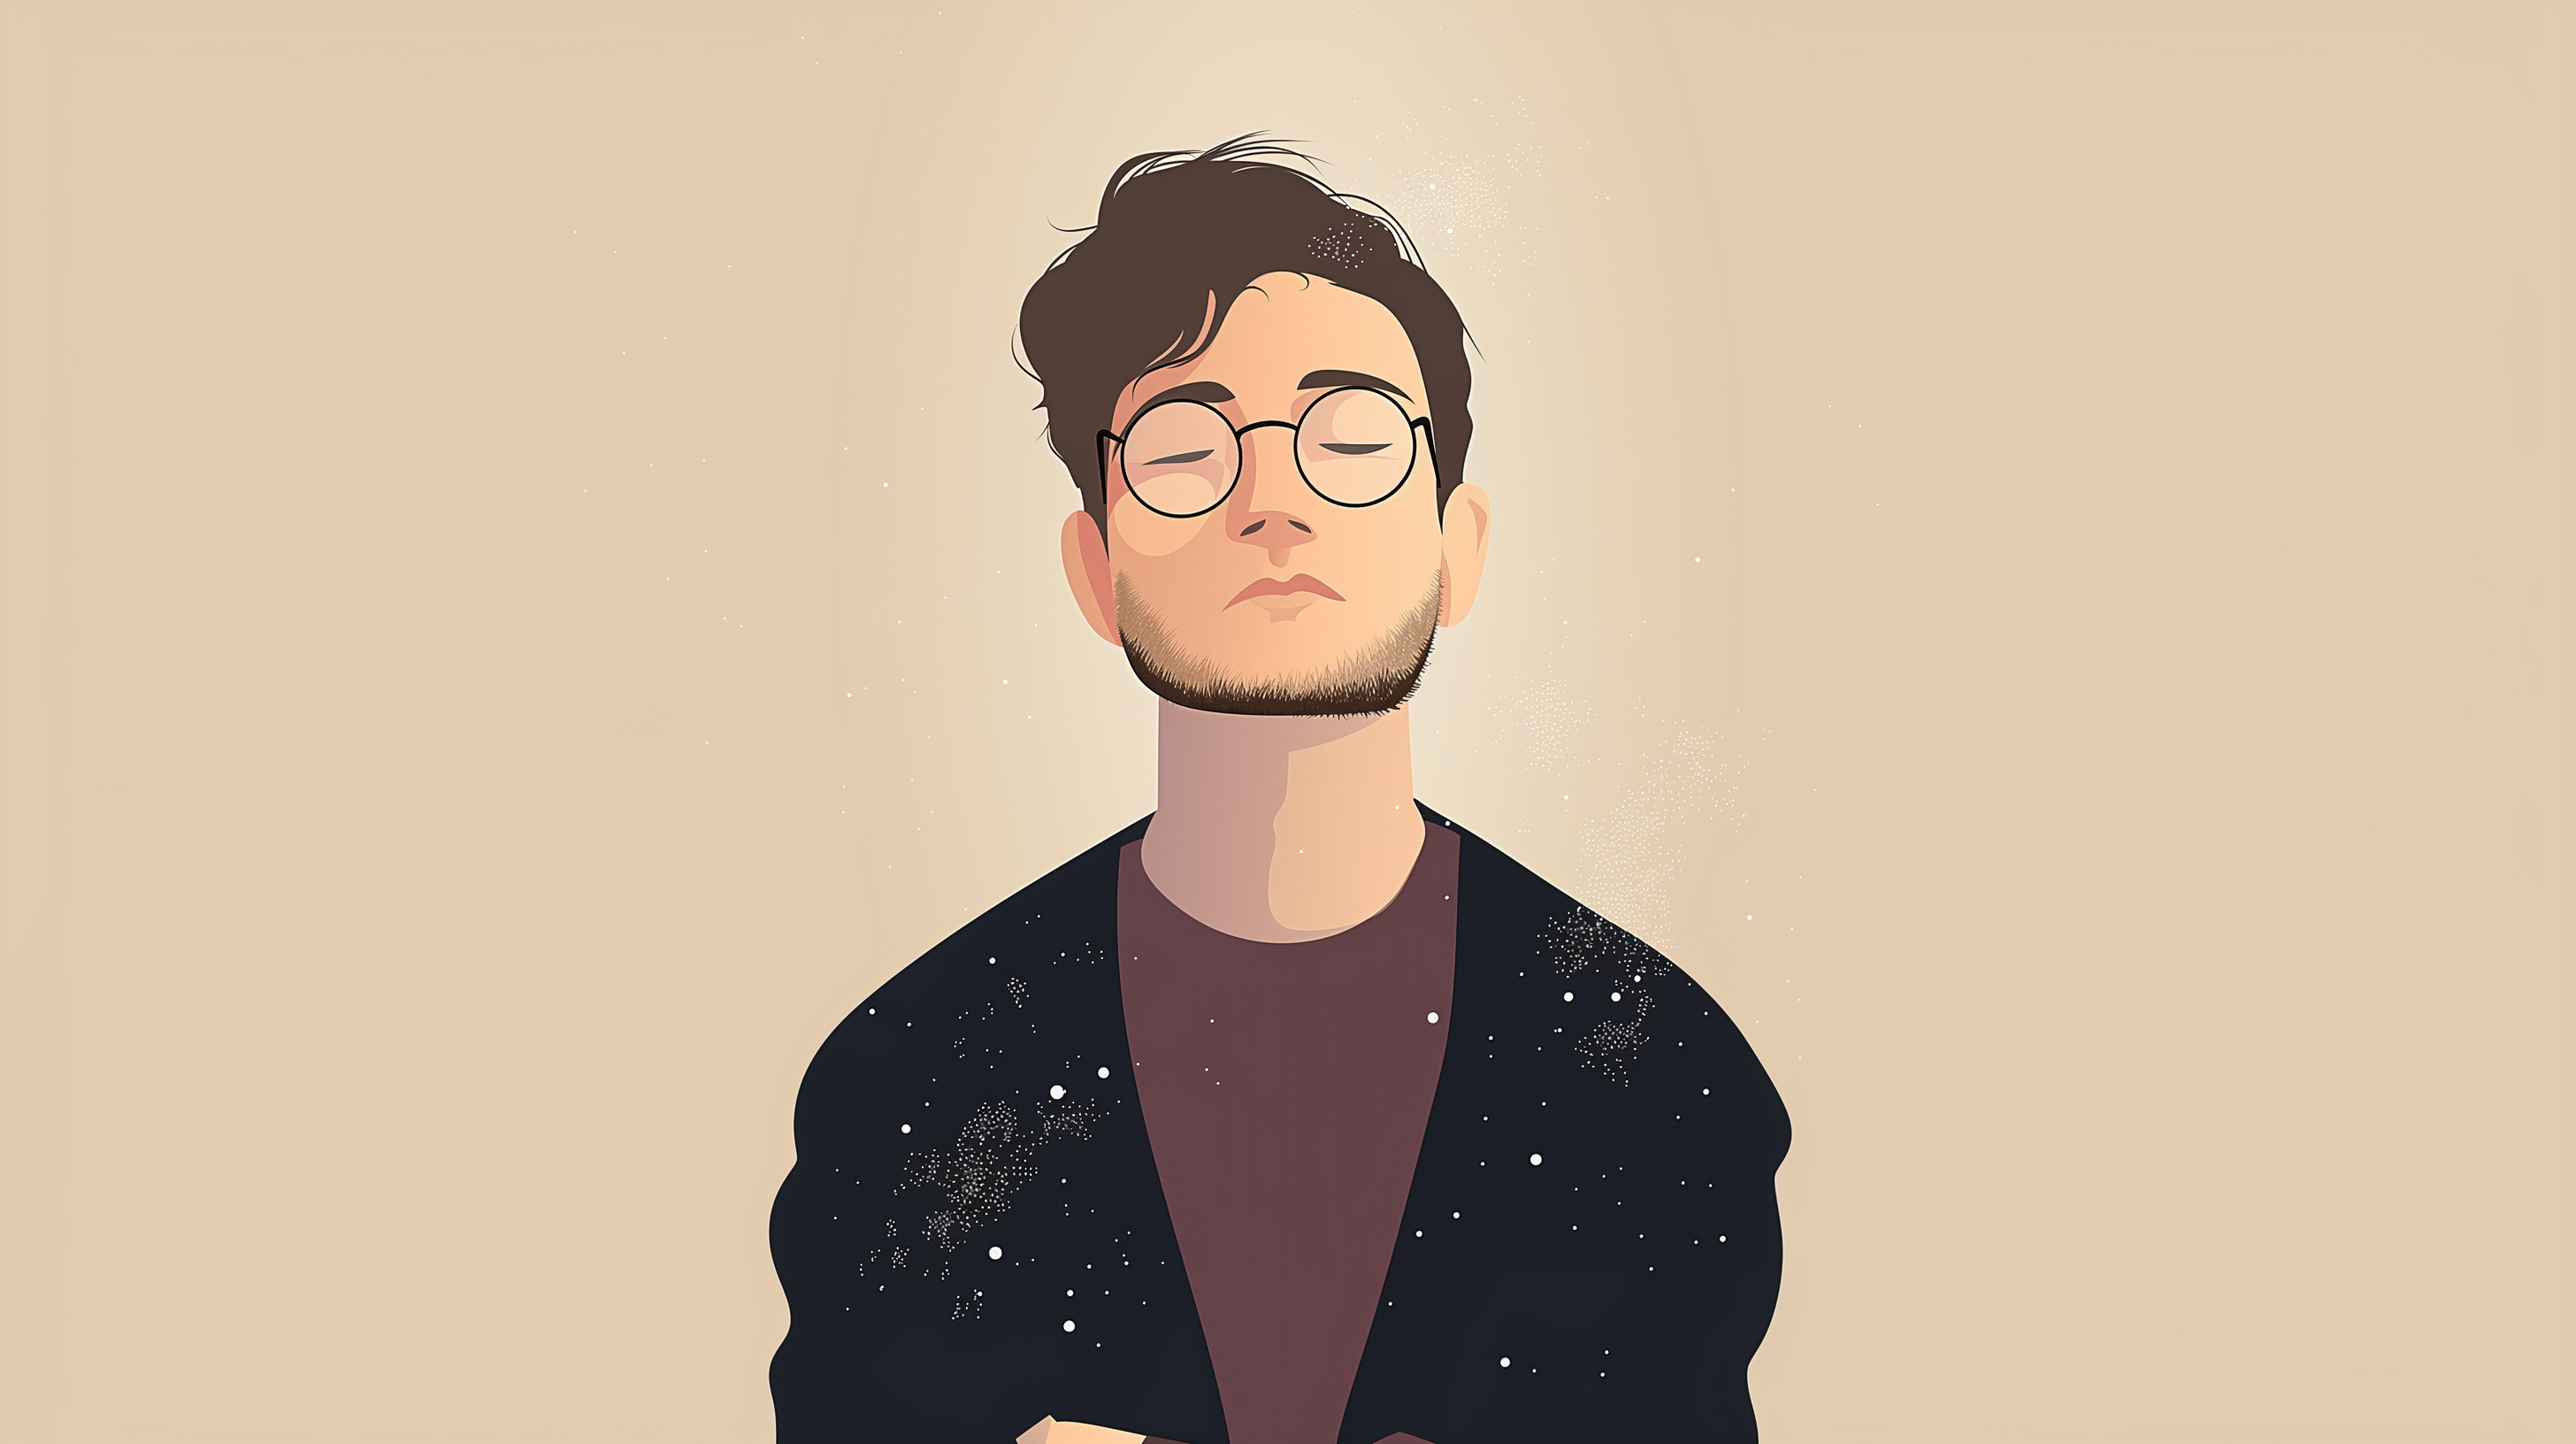 A Fun Guide to Create Your Own 2D SVG Avatar 🎨